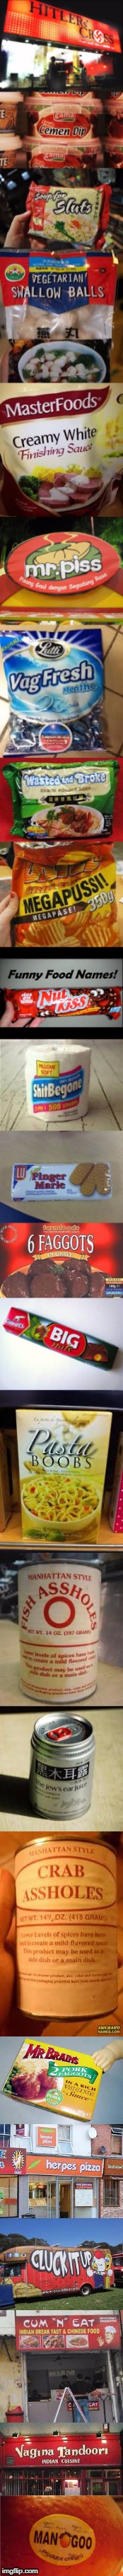 Funny Food and Restaurant names | image tagged in funny food names,funny,funny names,funny food,balls | made w/ Imgflip meme maker